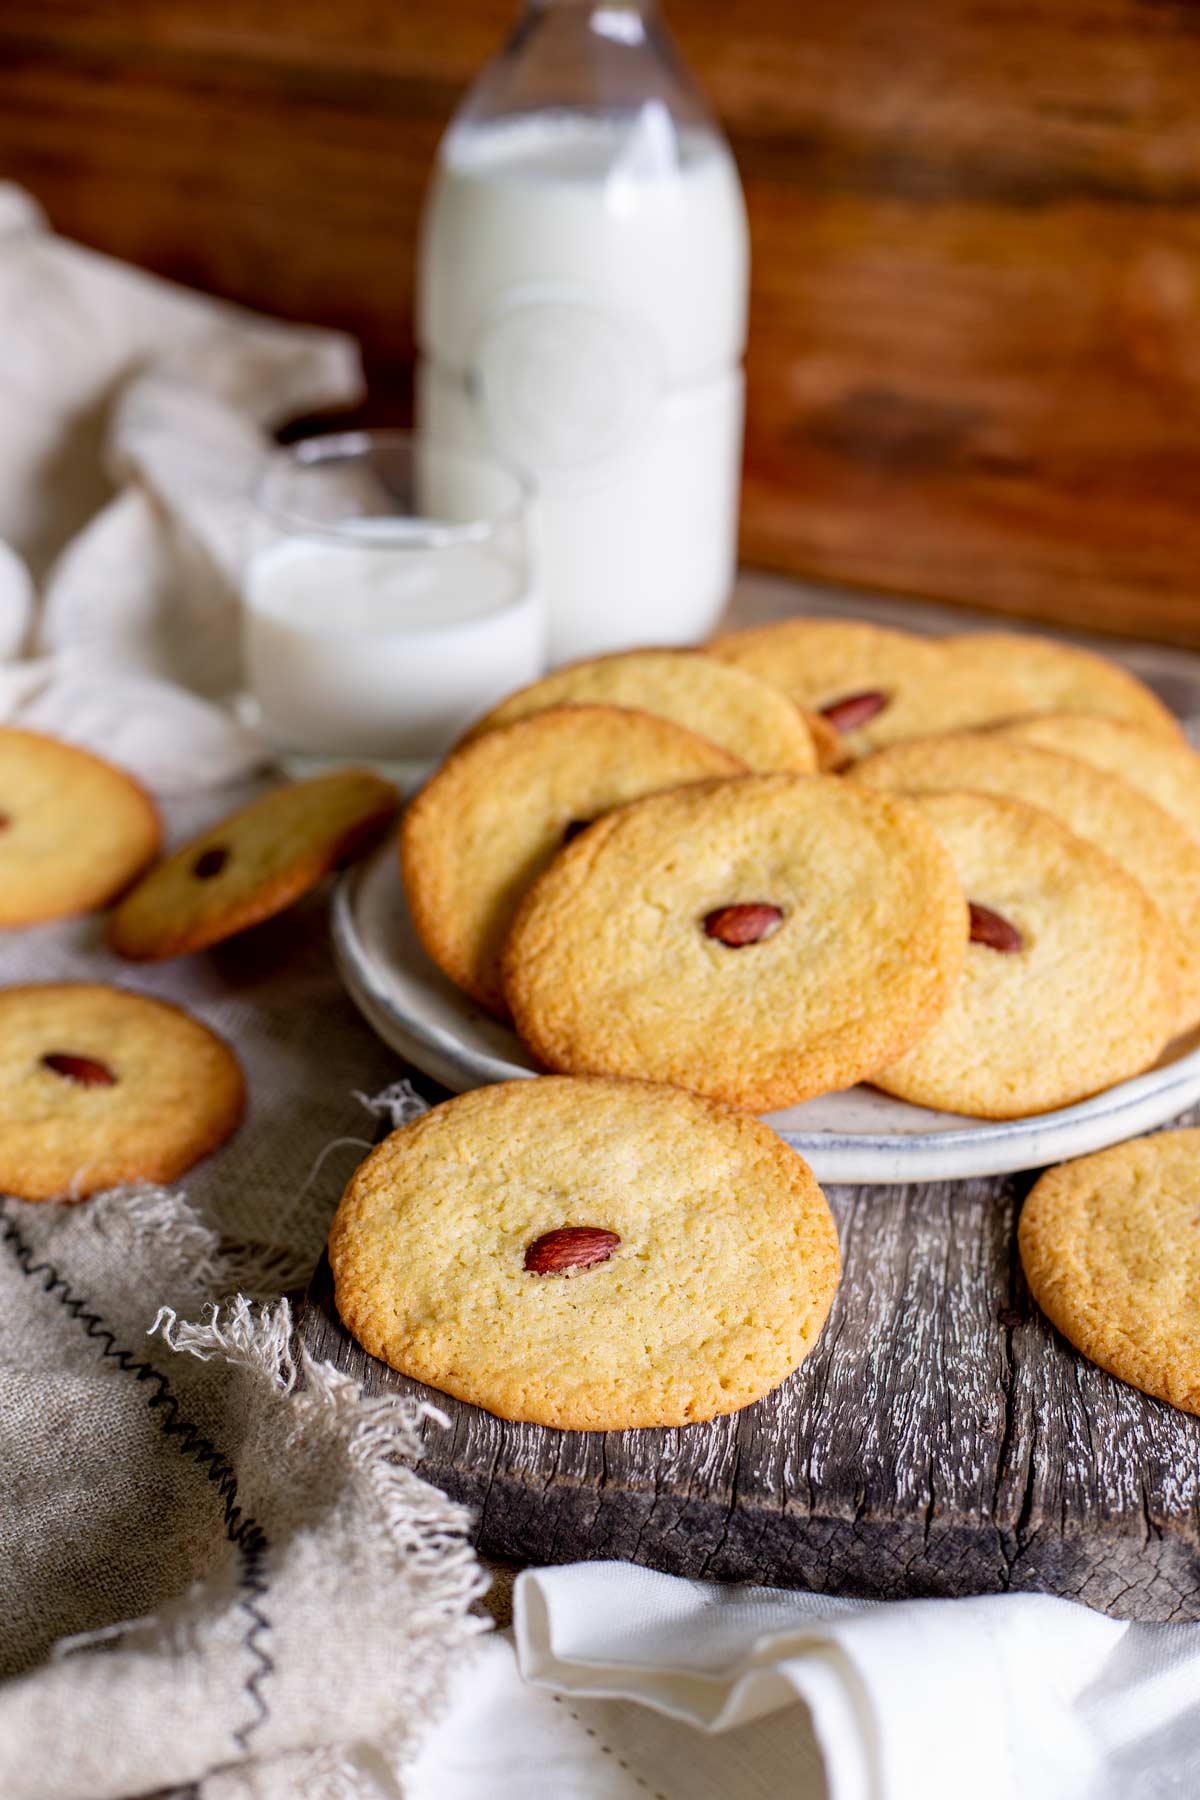 Rustic photo of flat cookies on a plate and wooden board